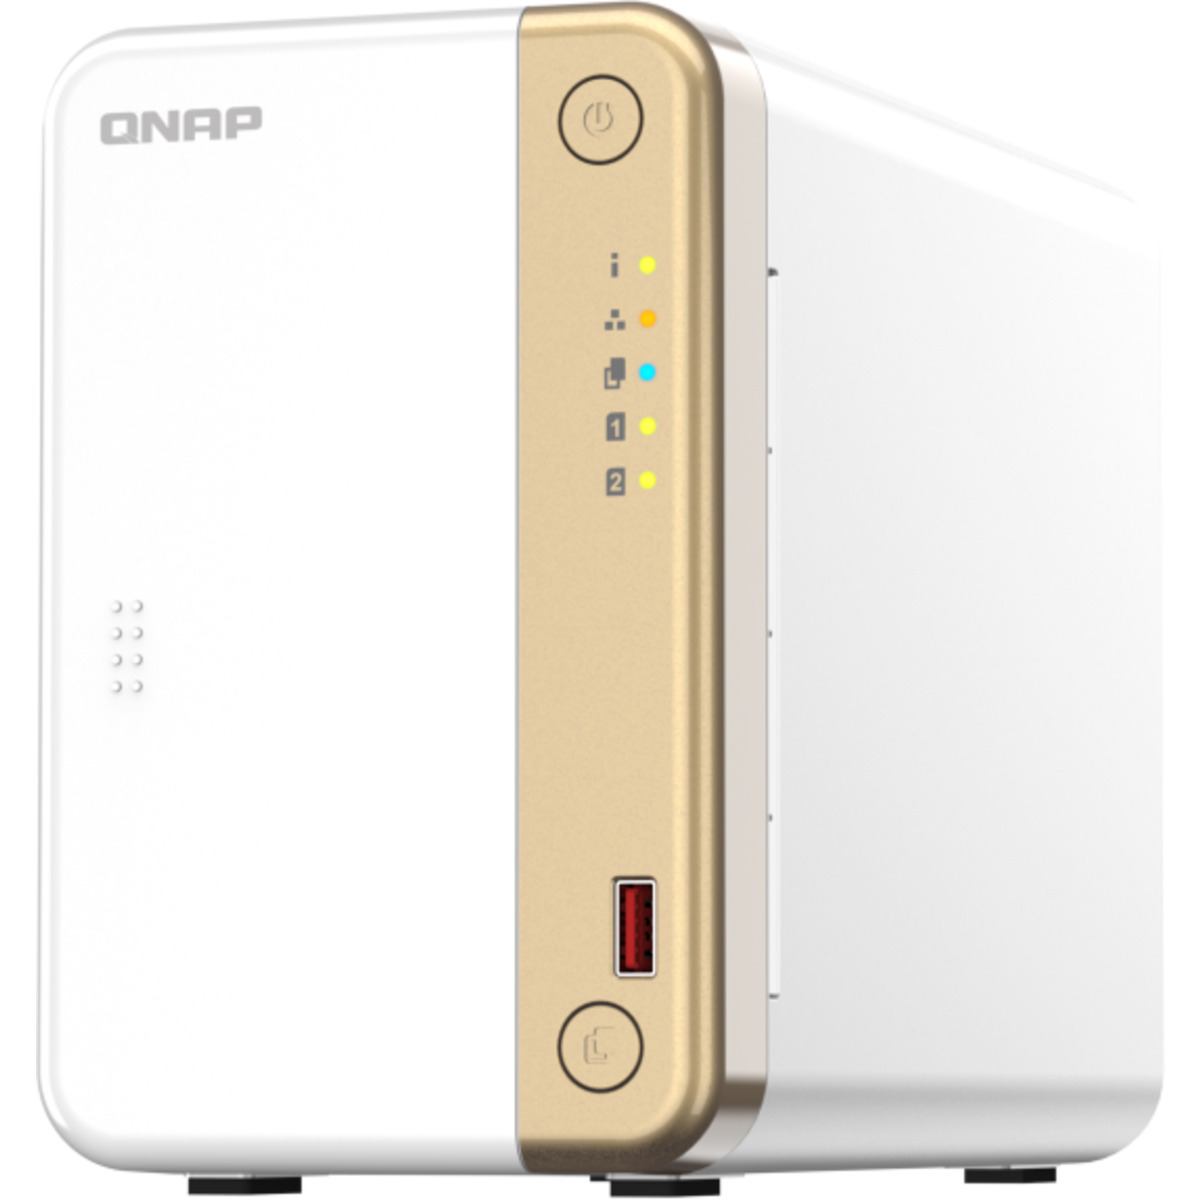 QNAP TS-262 16tb 2-Bay Desktop Personal / Basic Home / Small Office NAS - Network Attached Storage Device 1x16tb Seagate IronWolf Pro ST16000NT001 3.5 7200rpm SATA 6Gb/s HDD NAS Class Drives Installed - Burn-In Tested - ON SALE TS-262